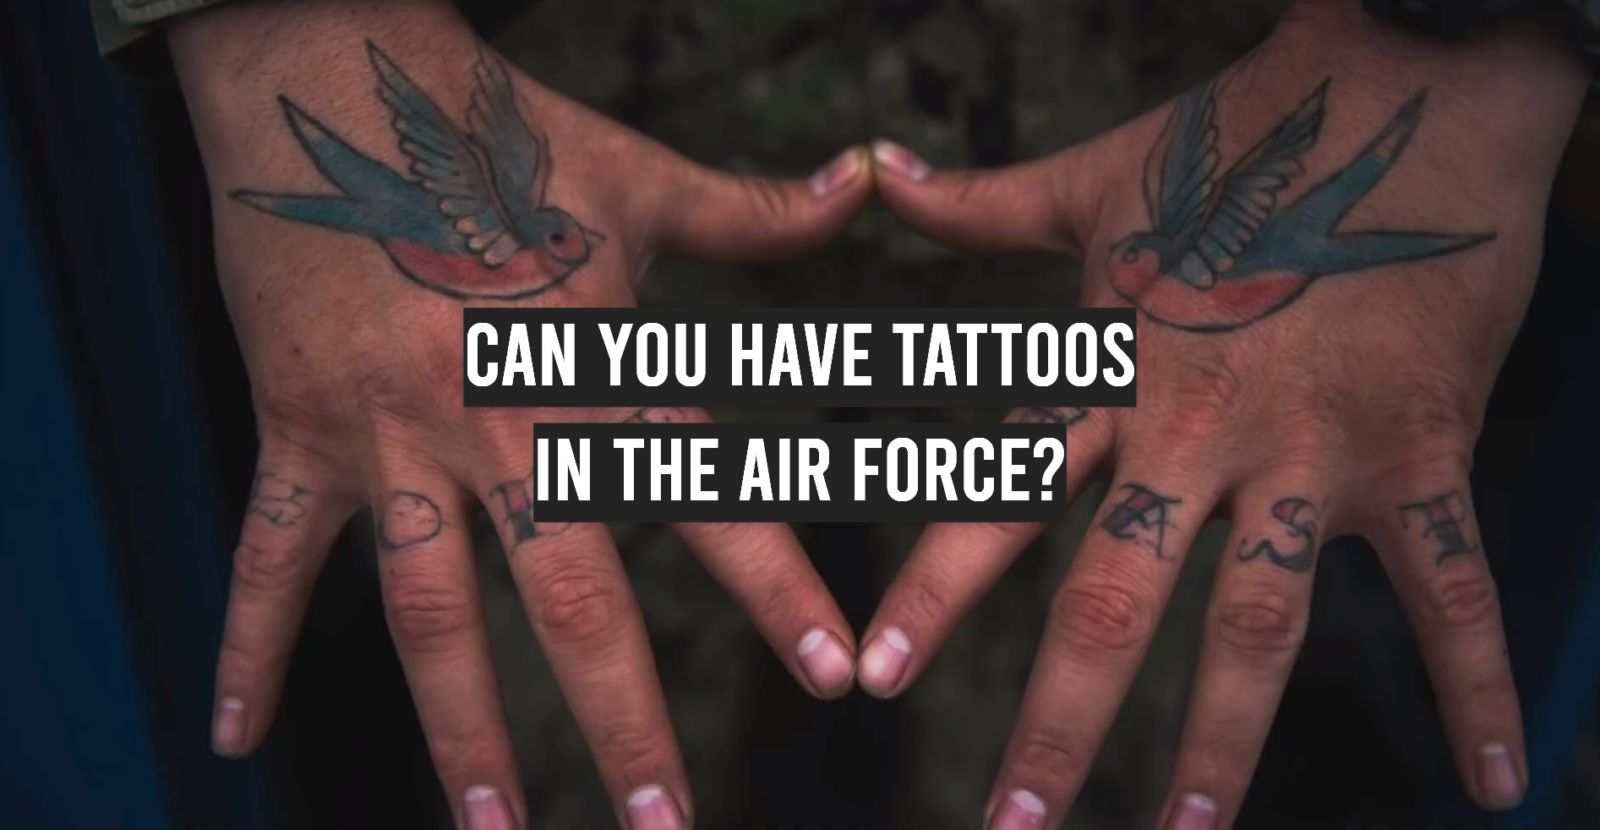 Can You Have Tattoos in the Air Force?